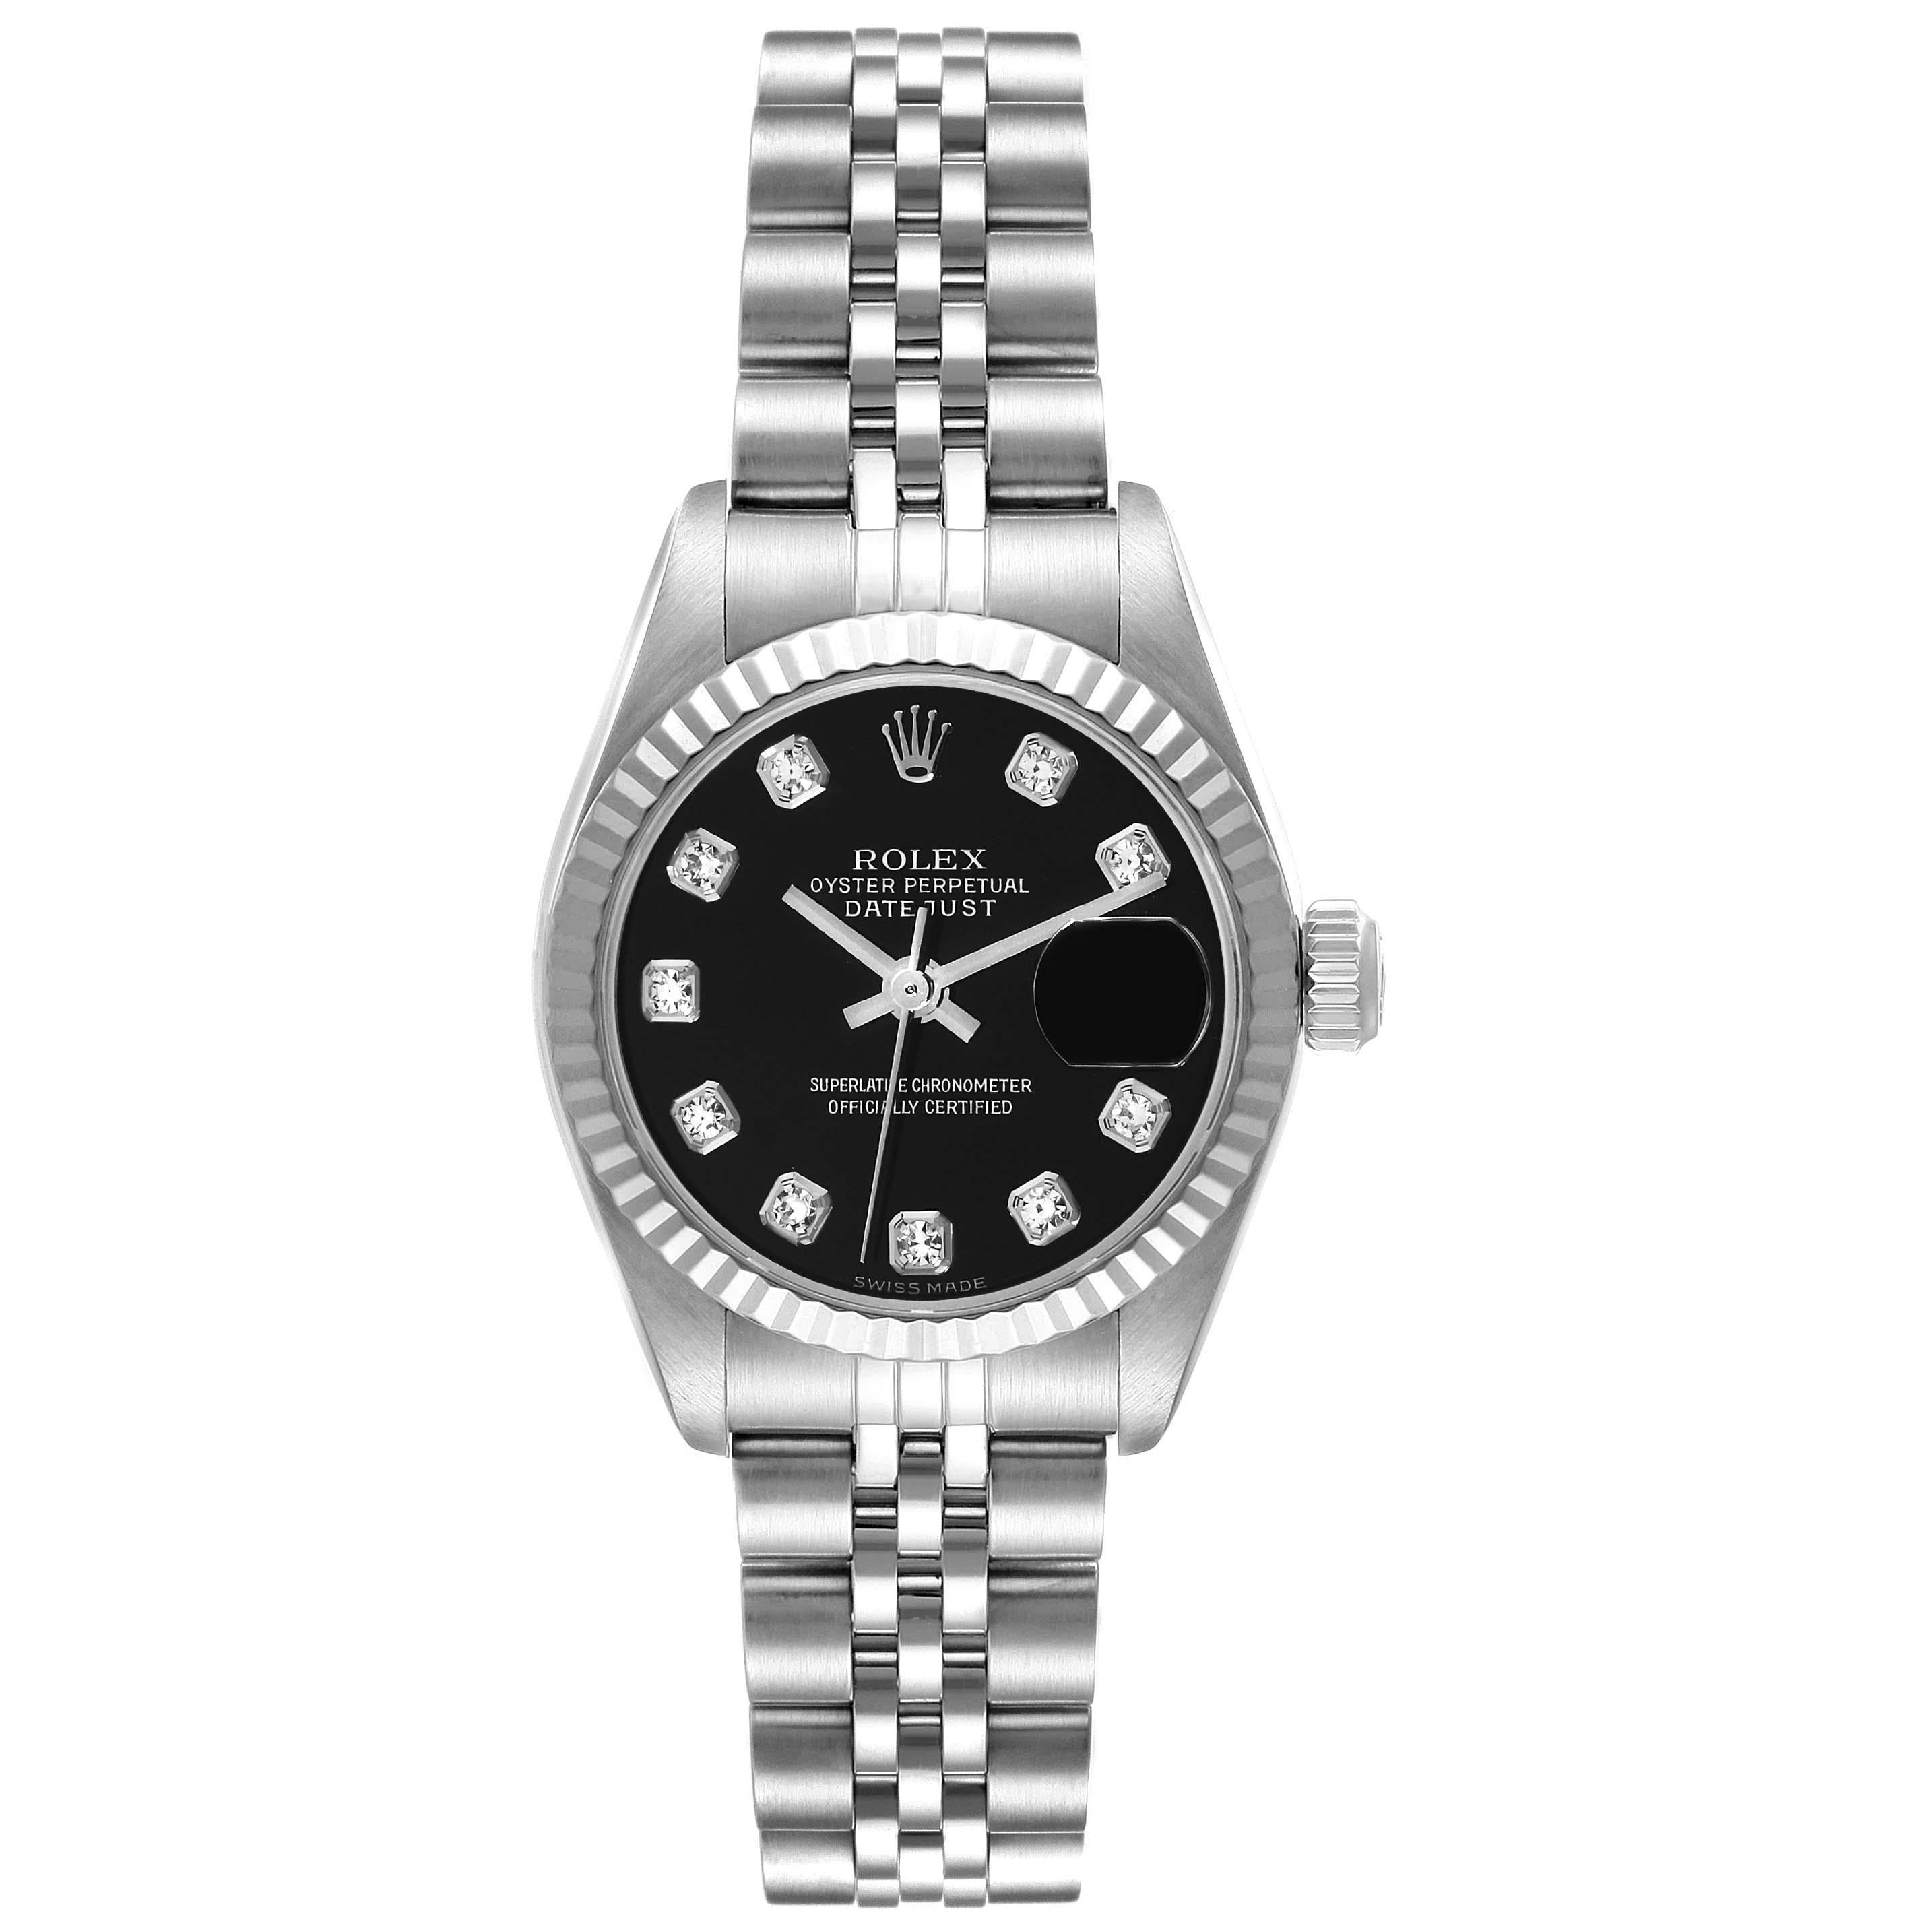 Rolex Datejust White Gold Diamond Dial Steel Ladies Watch 79174 Box Papers. Officially certified chronometer automatic self-winding movement. Stainless steel oyster case 26.0 mm in diameter. Rolex logo on the crown. 18K white gold fluted bezel.